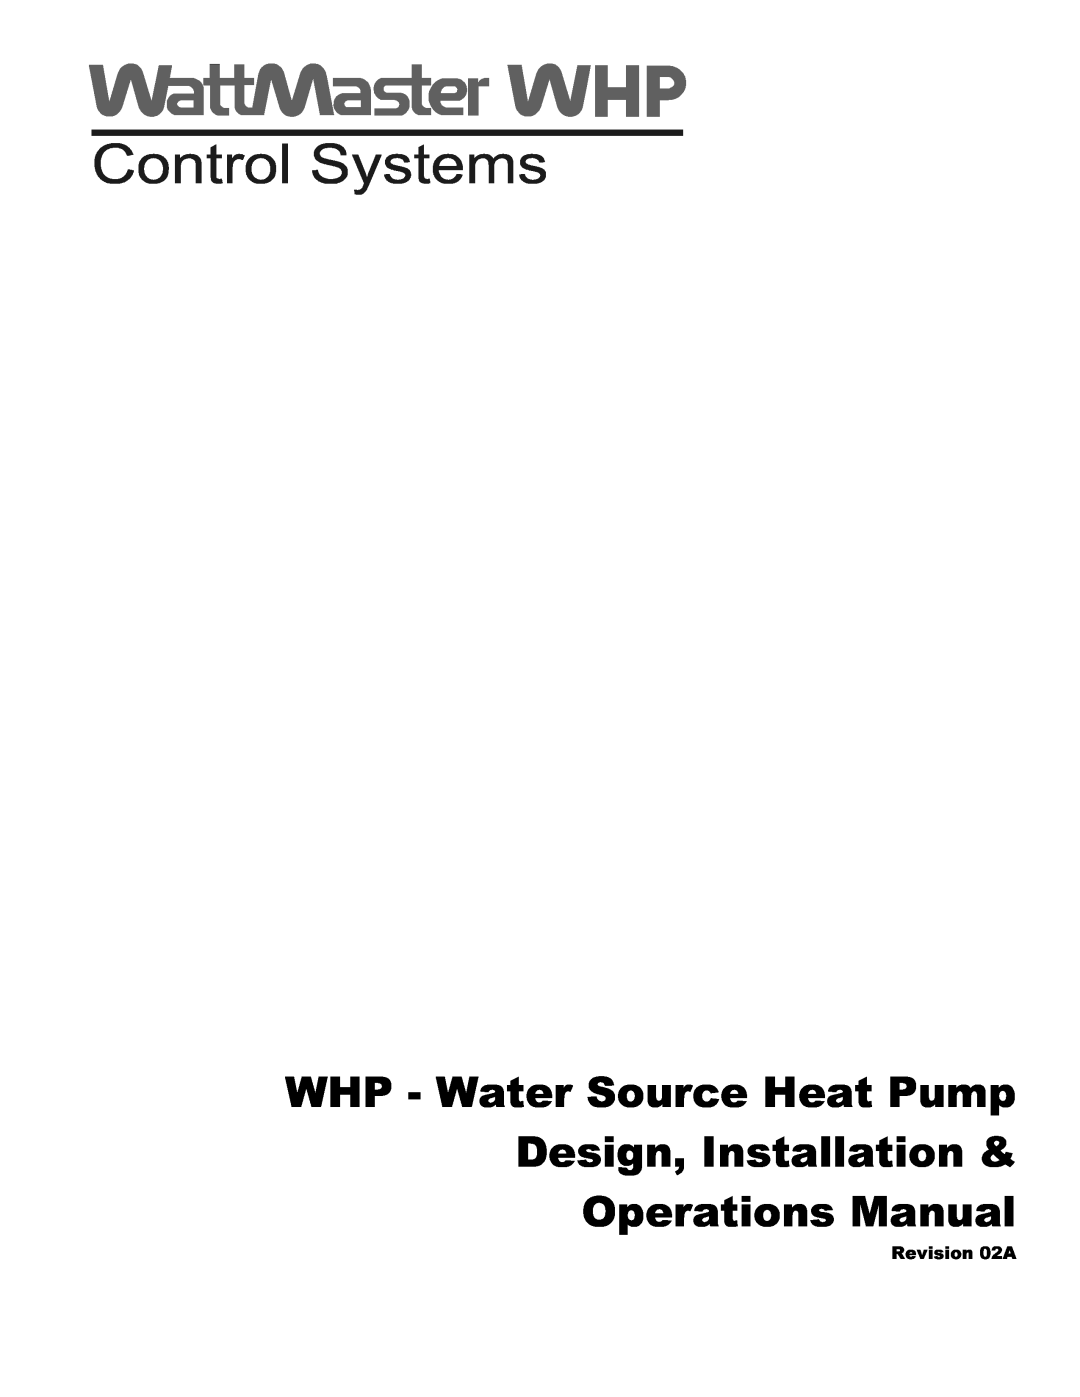 Heat Controller manual WHP - Water Source Heat Pump, Design, Installation & Operations Manual, Revision02A 